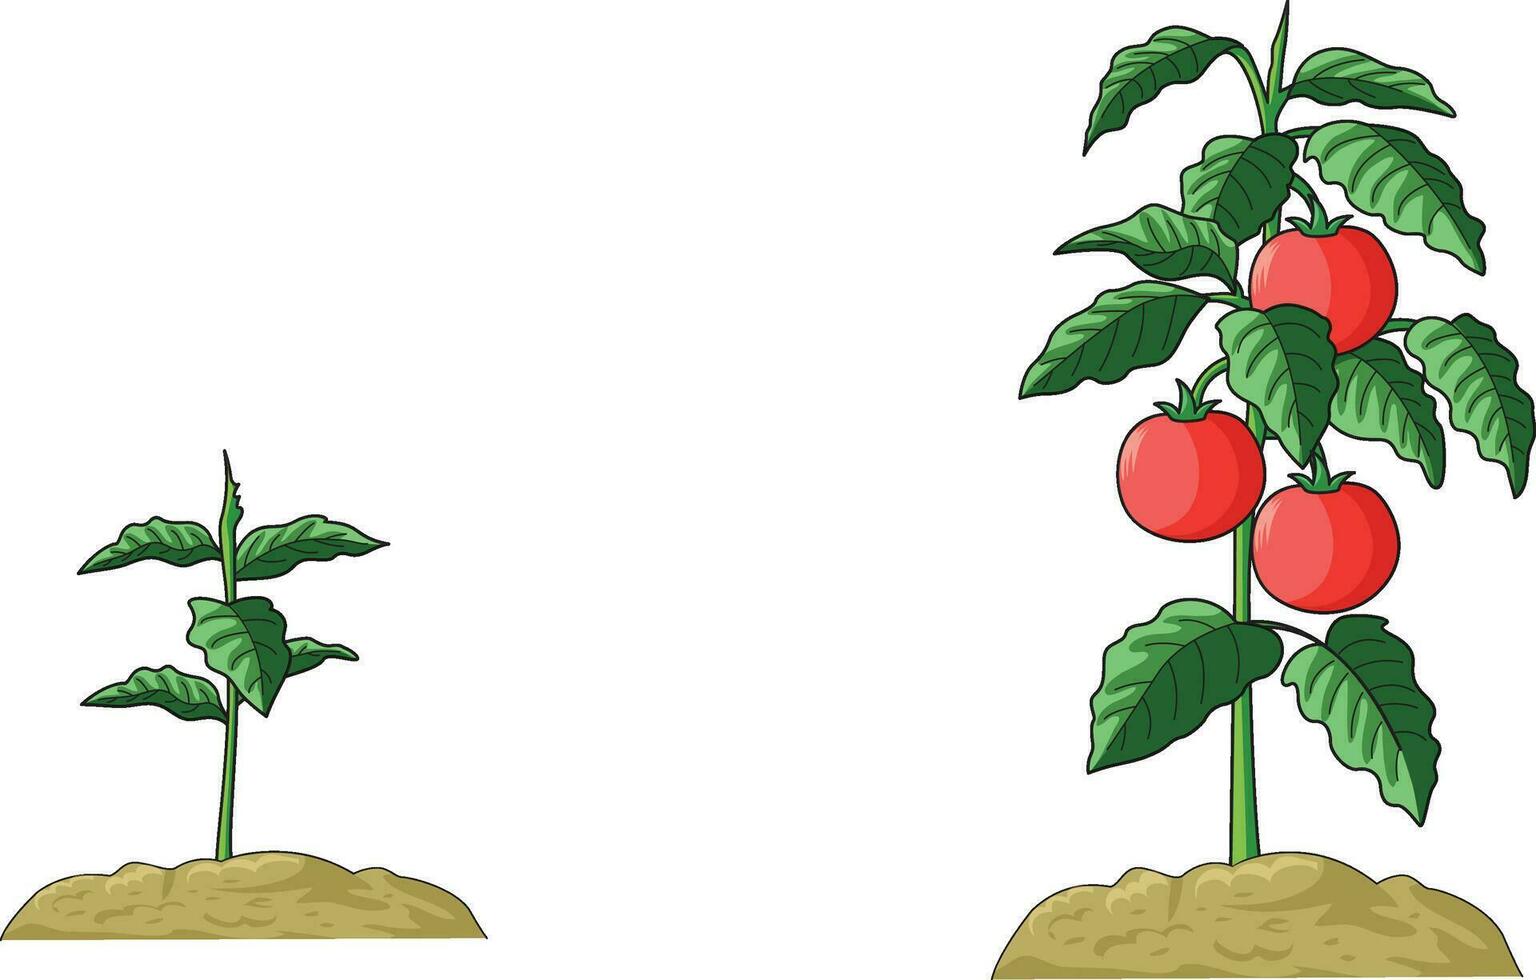 Illustration showing plant rooted in soil with leaves and tomato fruits vector